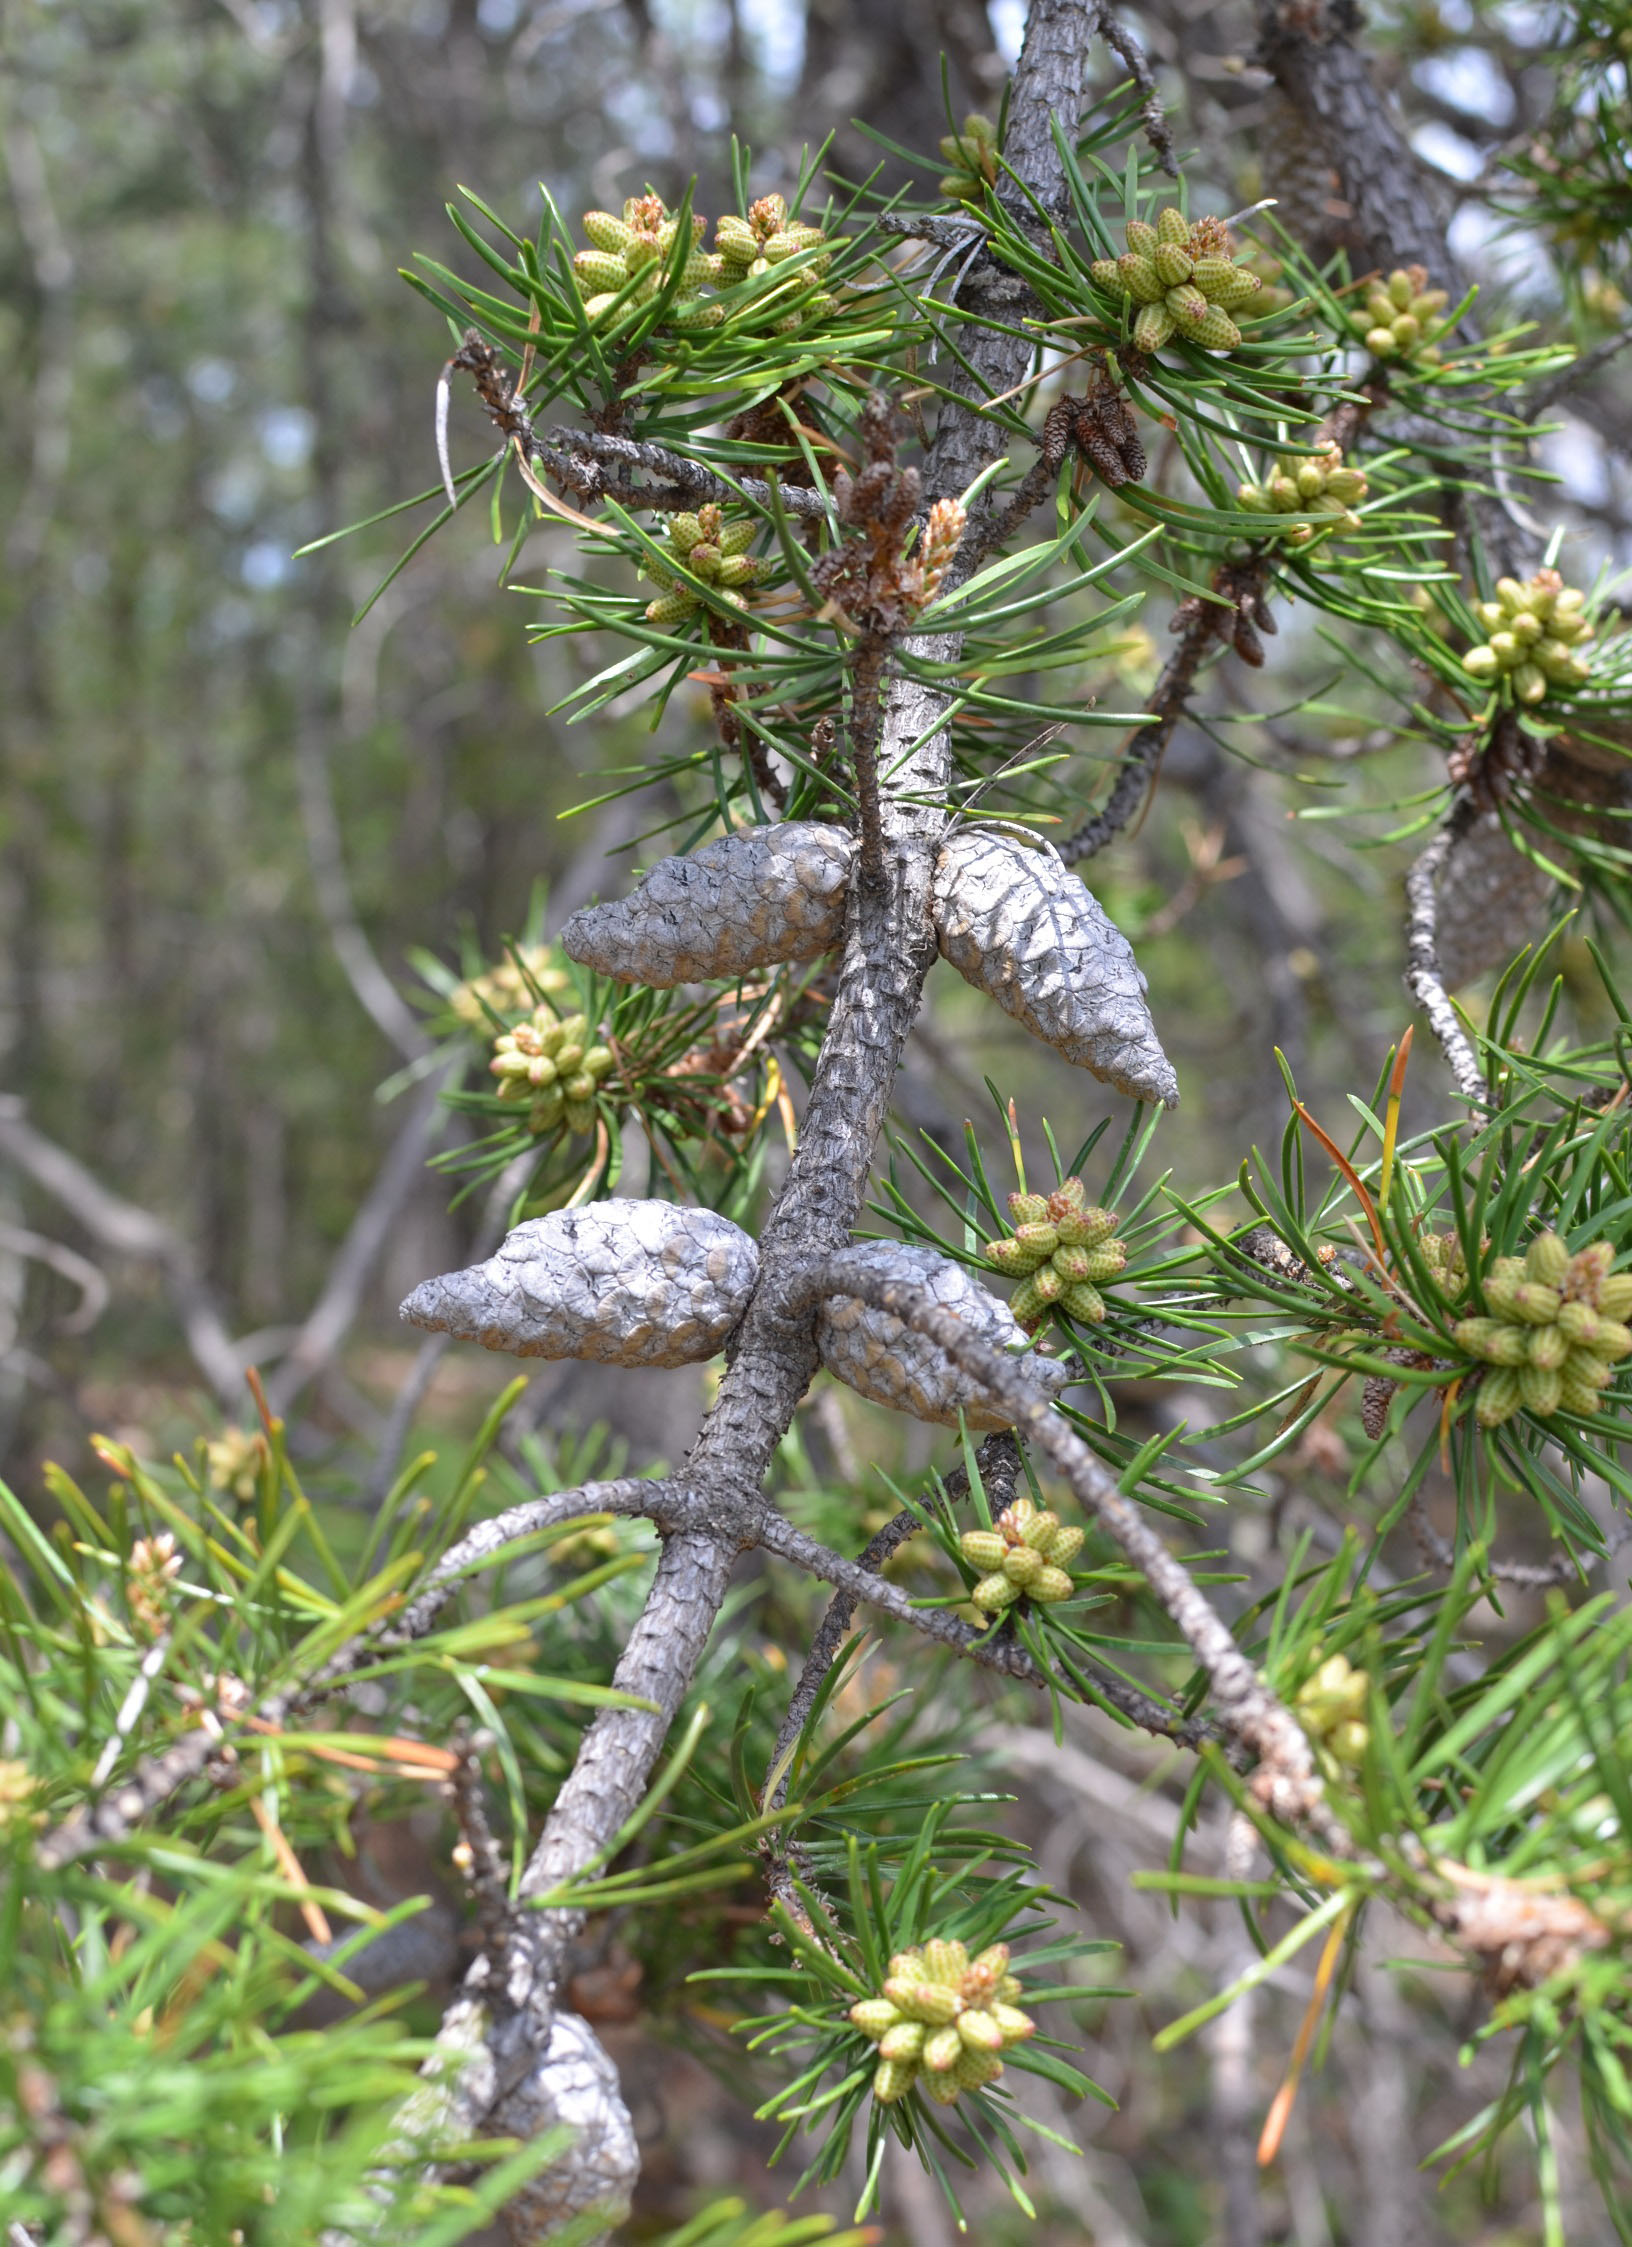 Bob St.Pierre on X: PINE CONE PONDERING Tonight's dog run left me  considering the variety of ways plants spread their seed. From pine cones  to maple helicopters to oak acorns to milkweed